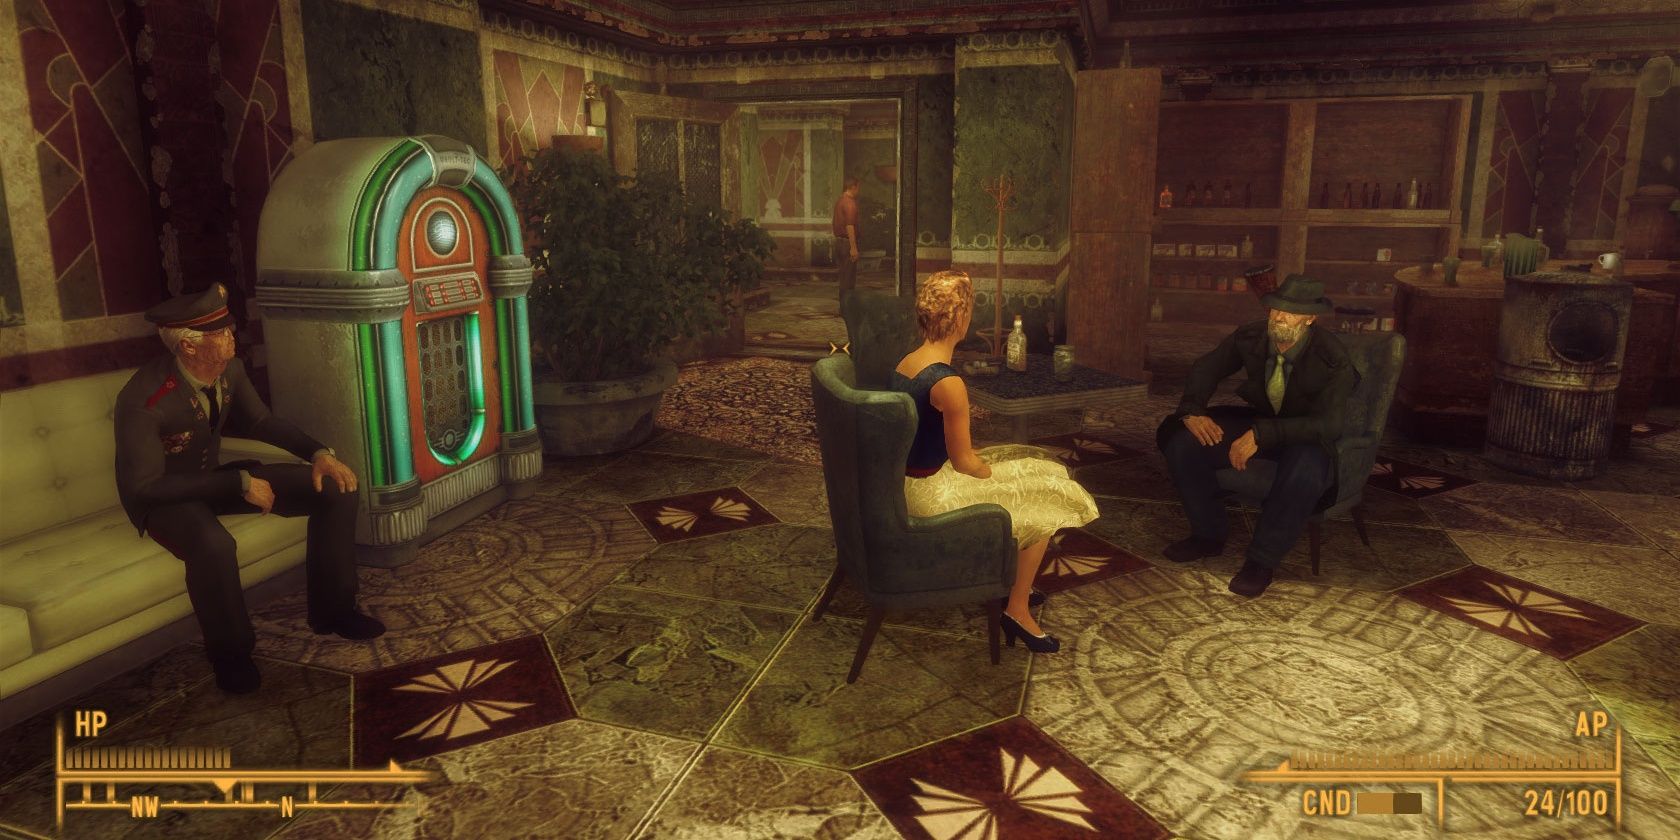 A screenshot of people sitting down in the Tenpenny Tower Reborn Mod in Fallout 3